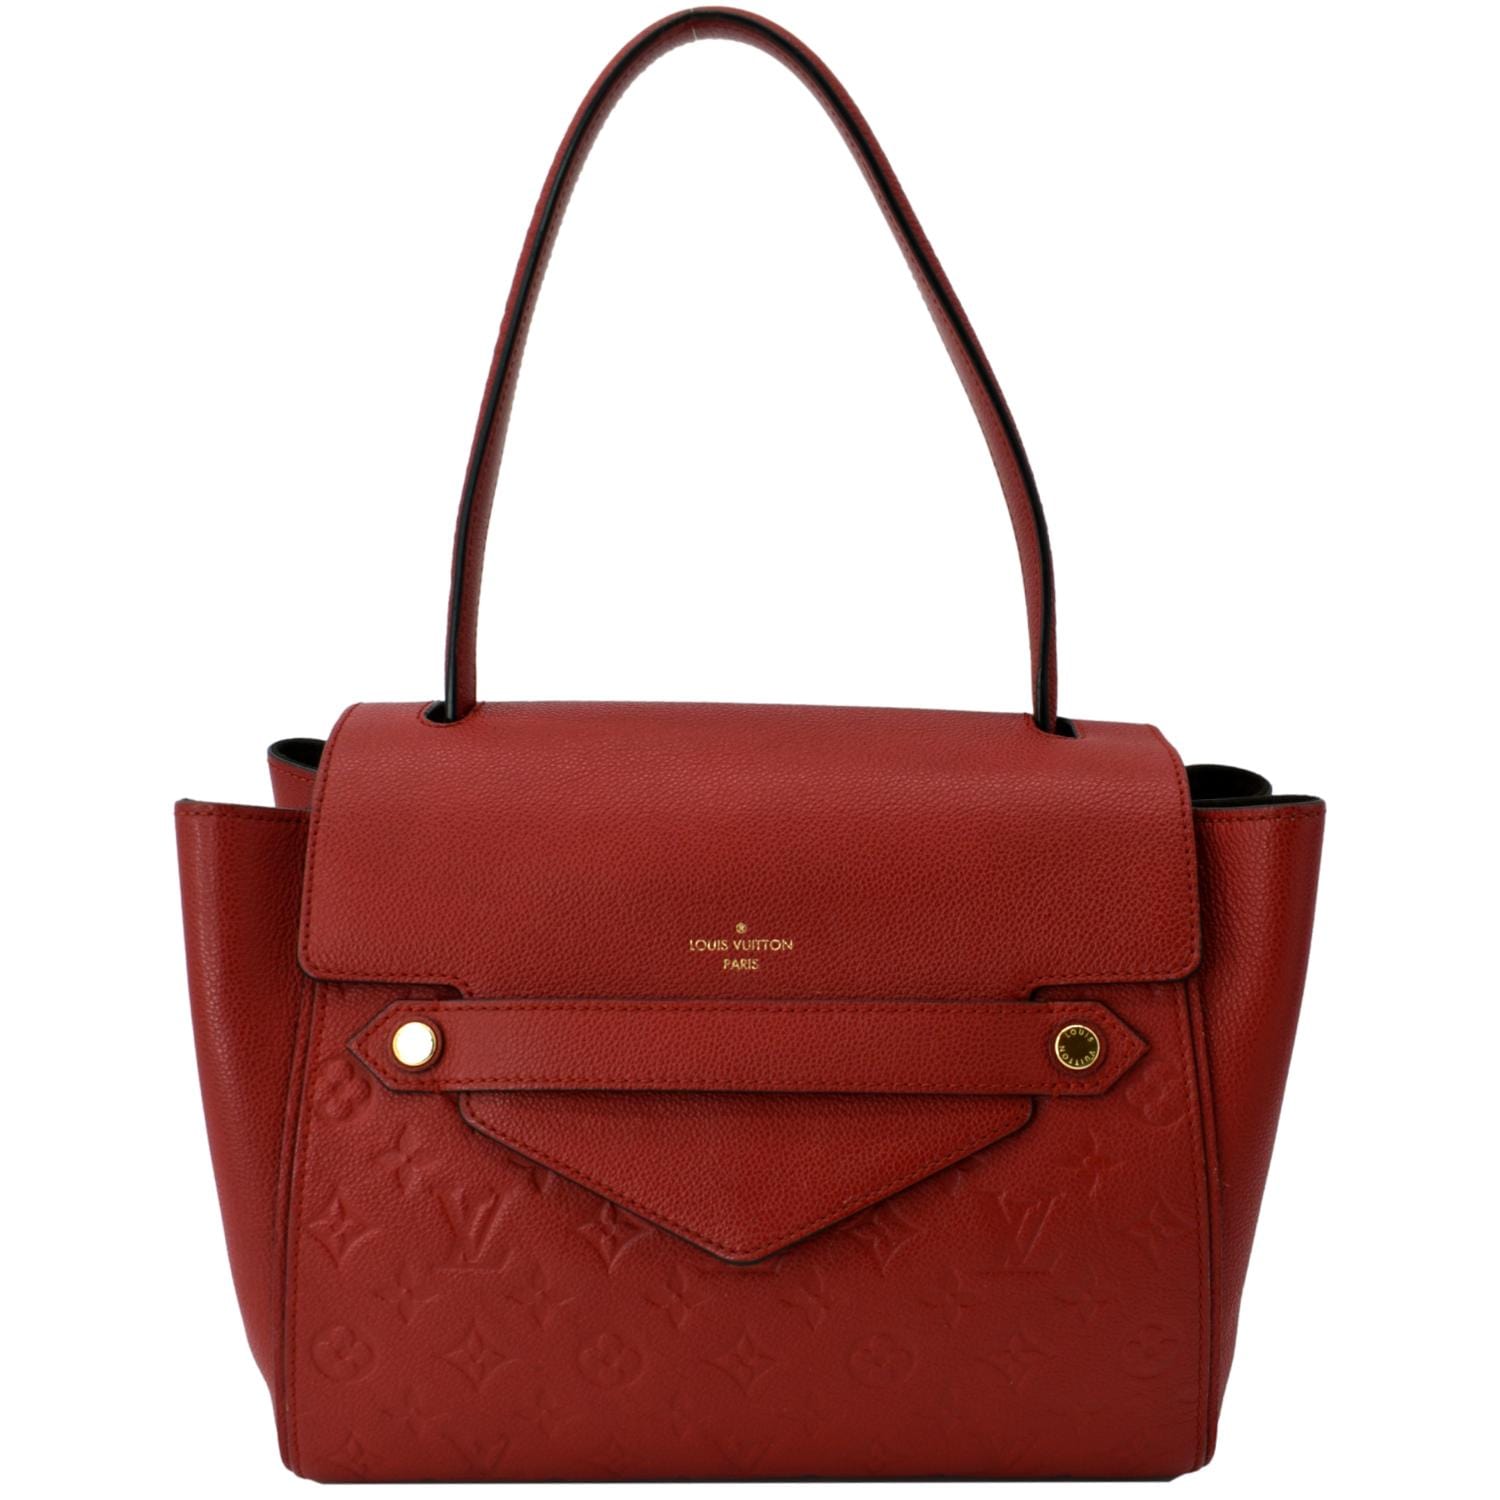 Buy Pre-owned & Brand new Luxury Louis Vuitton Empreinte Red